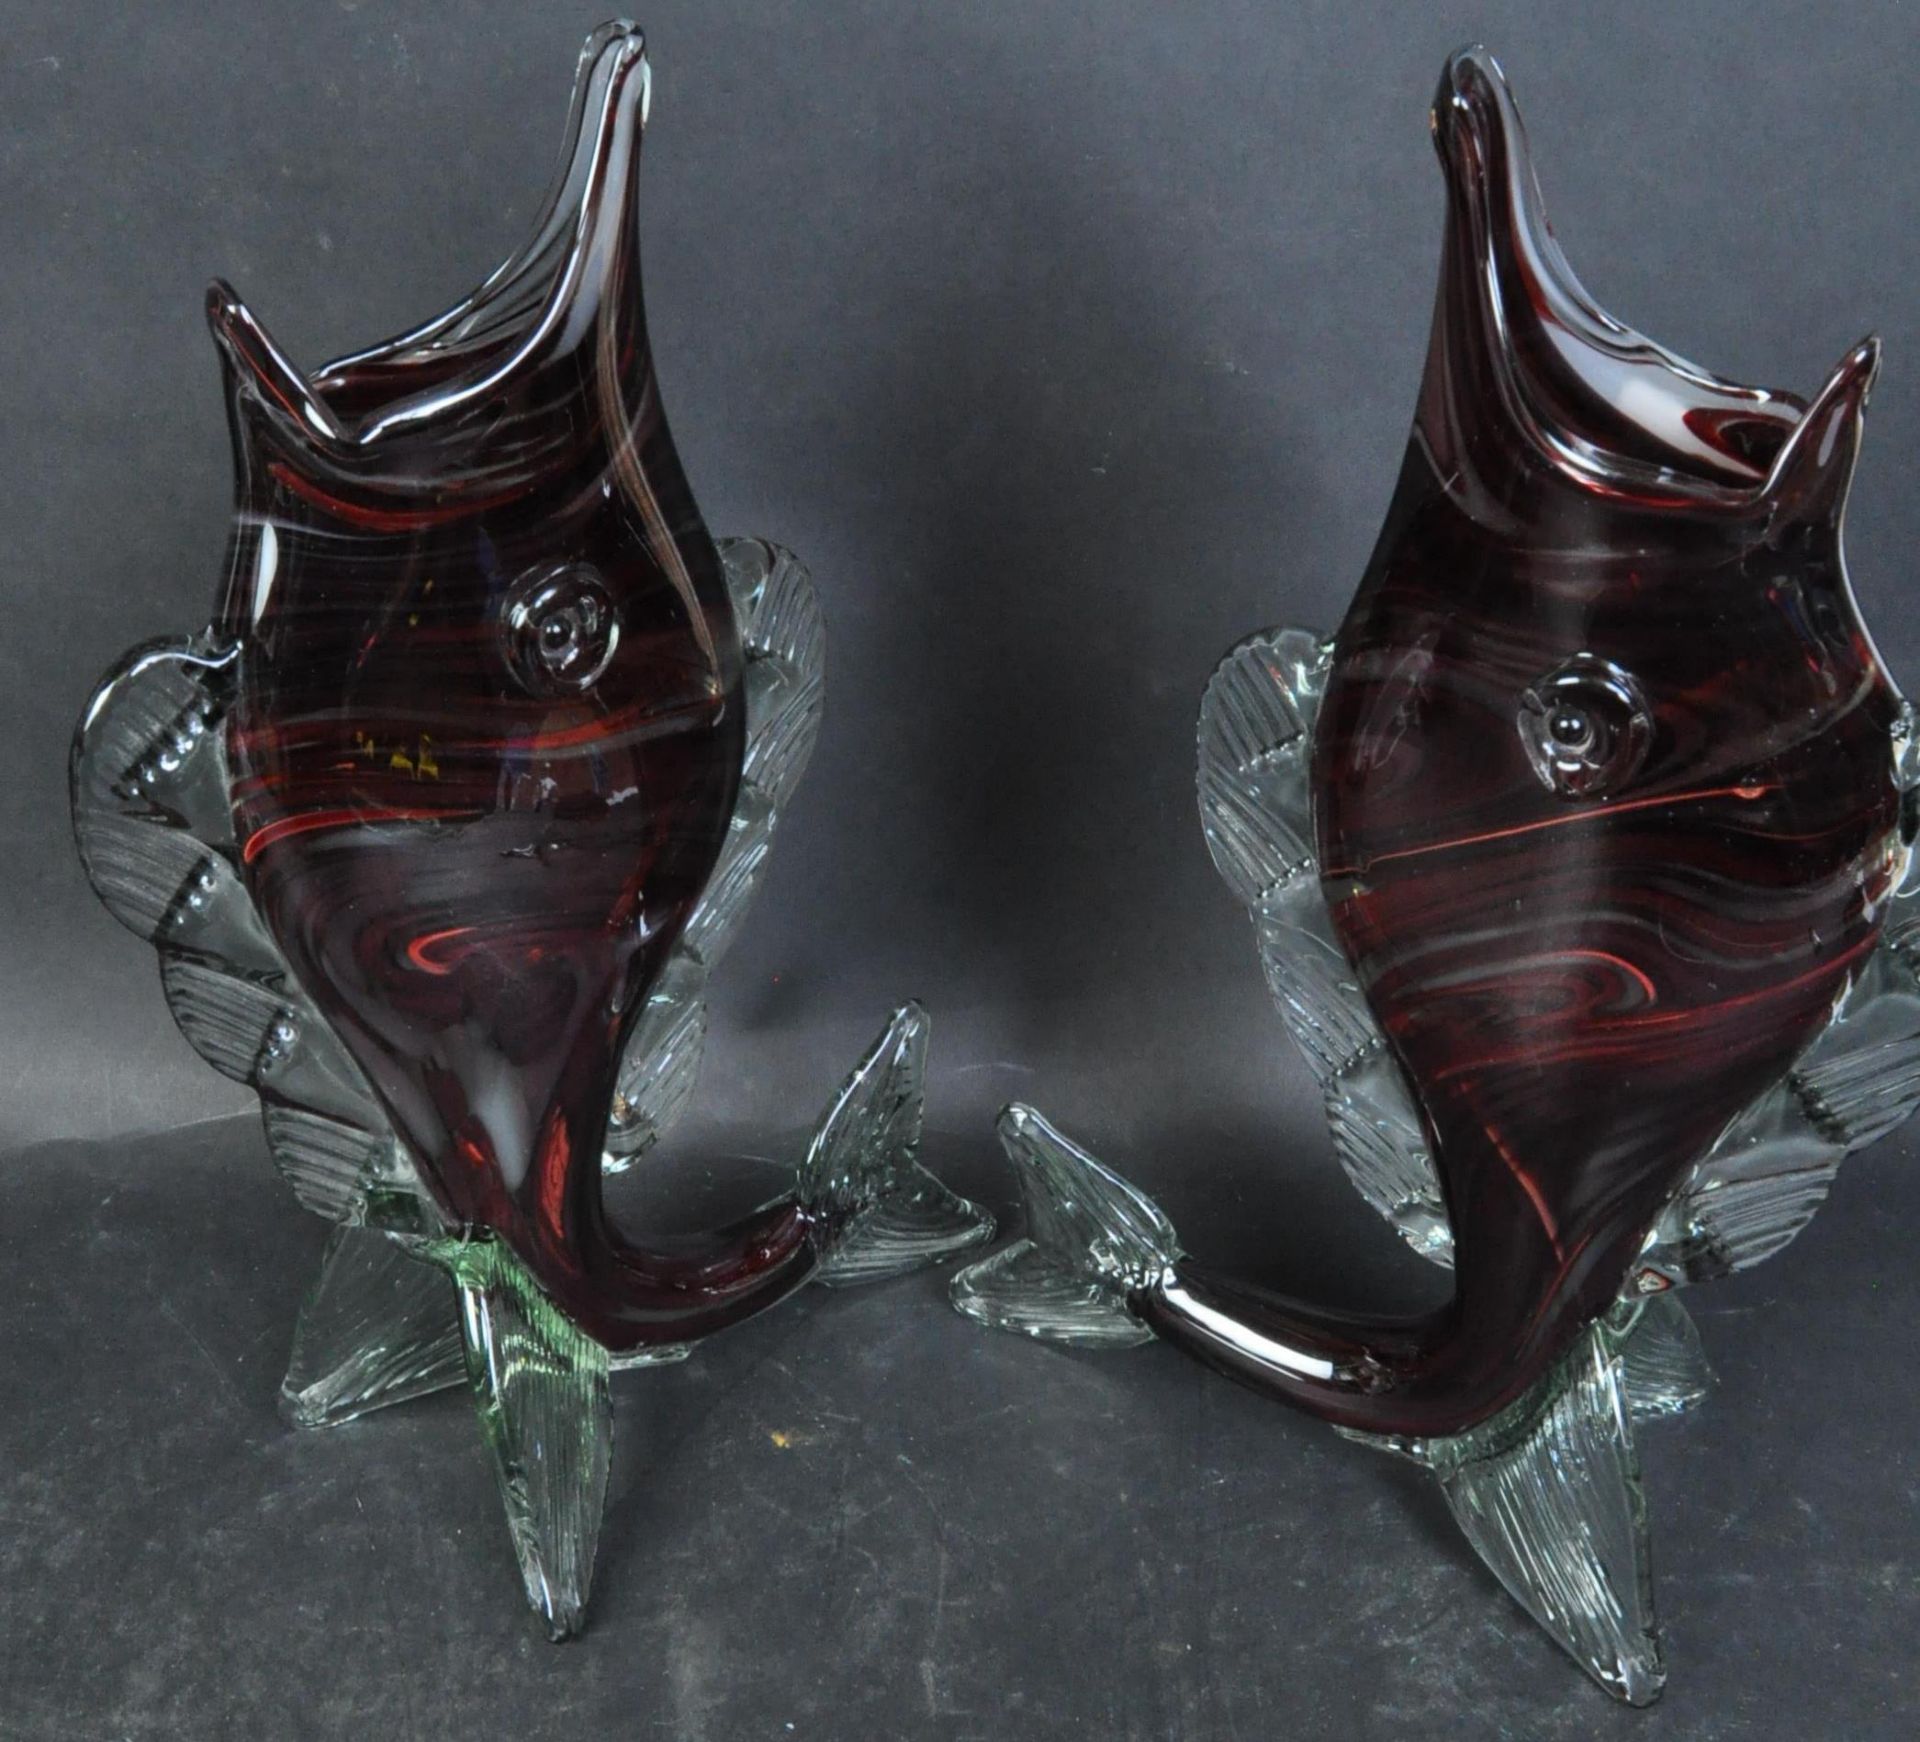 TWO RETRO VINTAGE MURANO GLASS FISH SHAPED VASES - Image 2 of 4